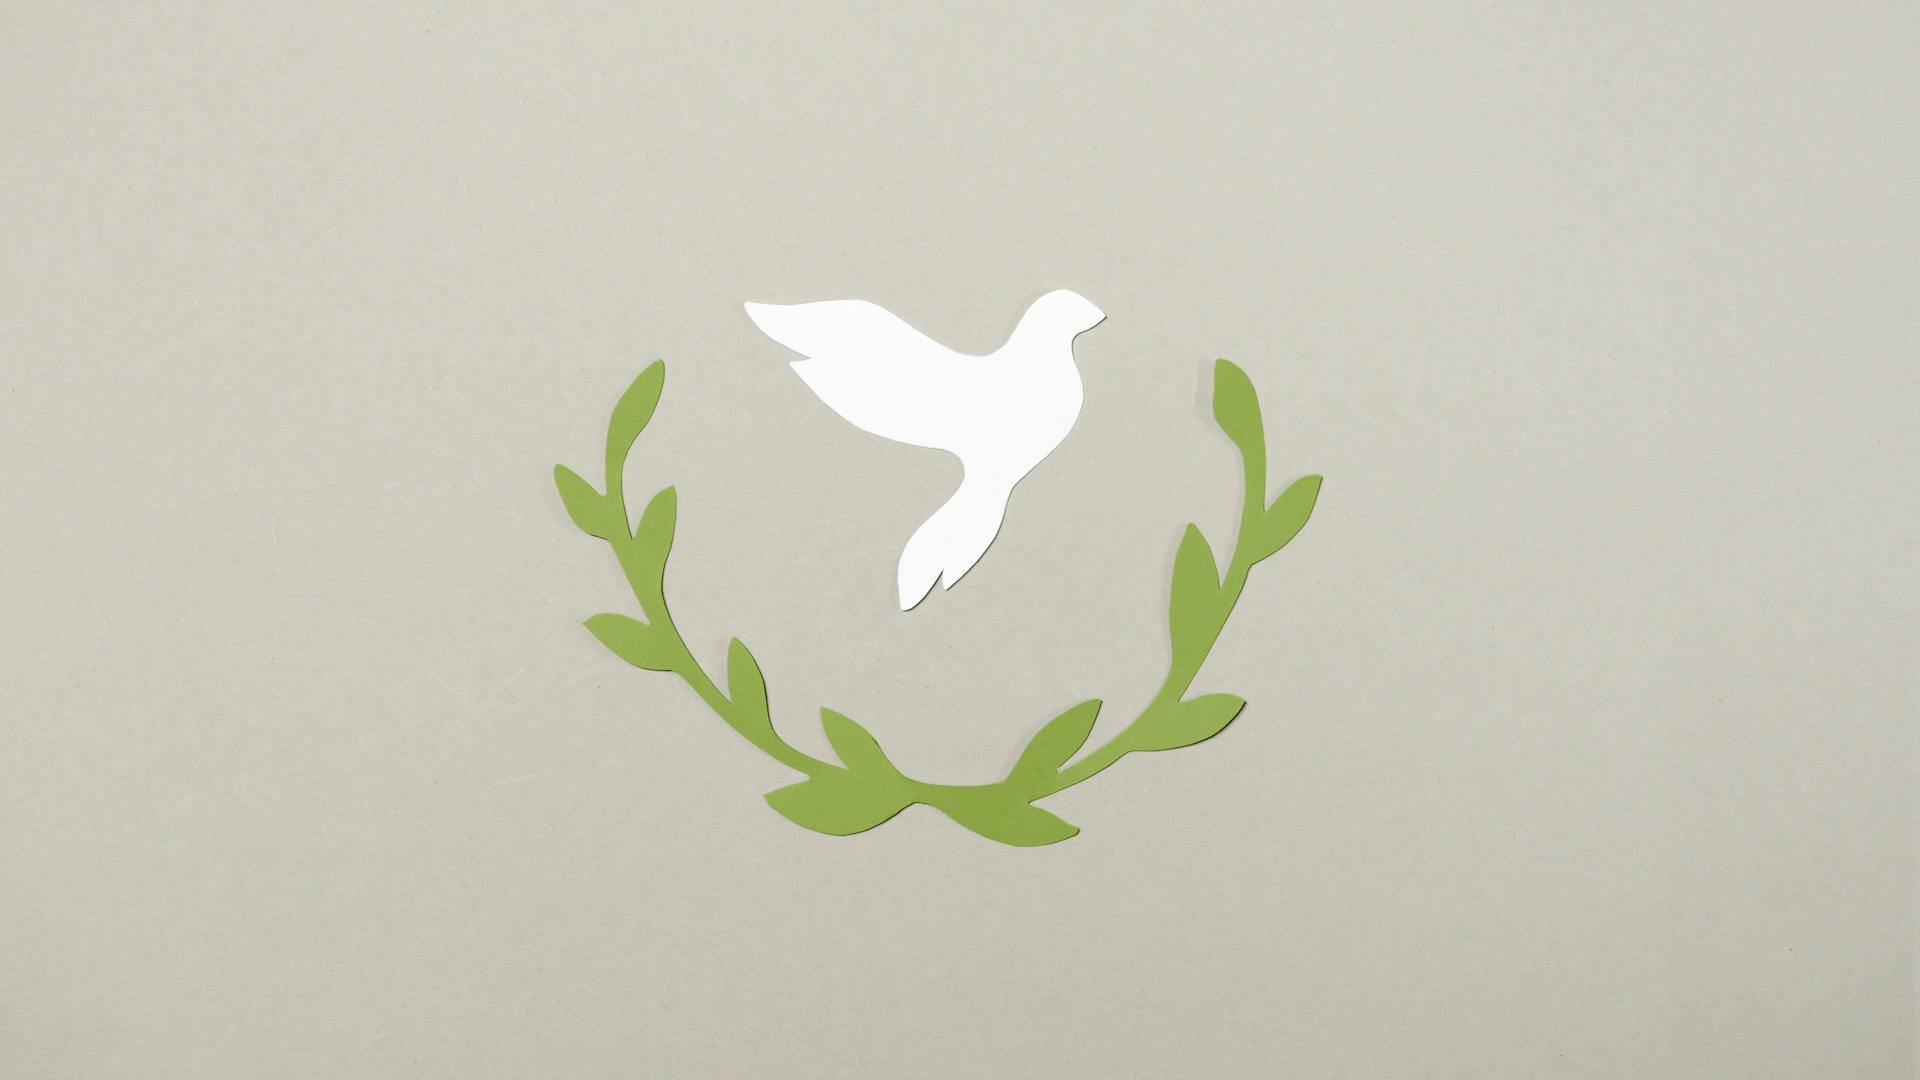 a peace dove against a beige background